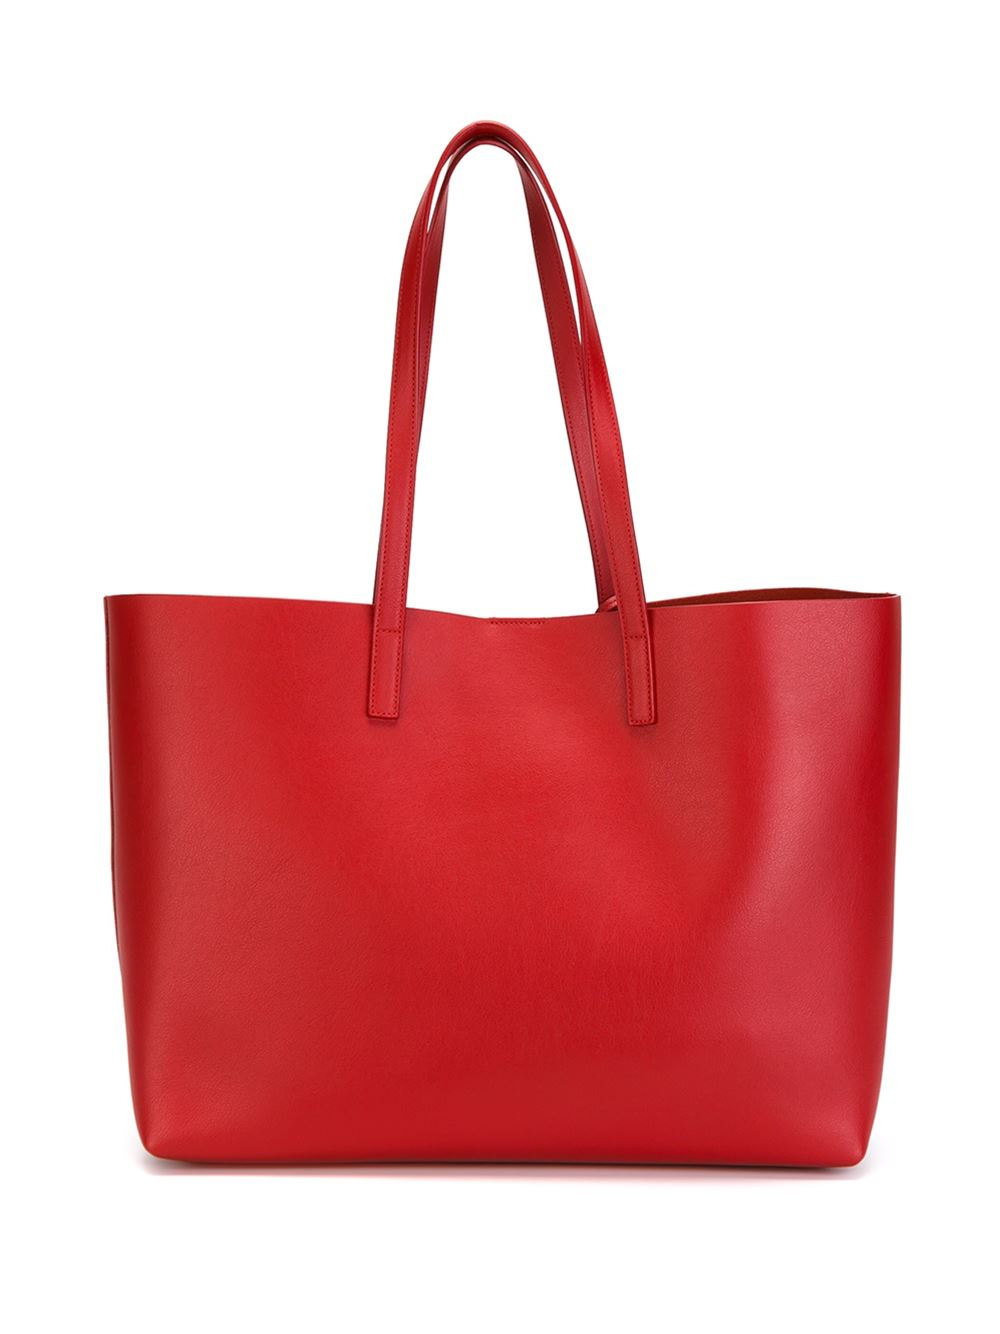 Saint laurent Large Shopper Tote in Red | Lyst